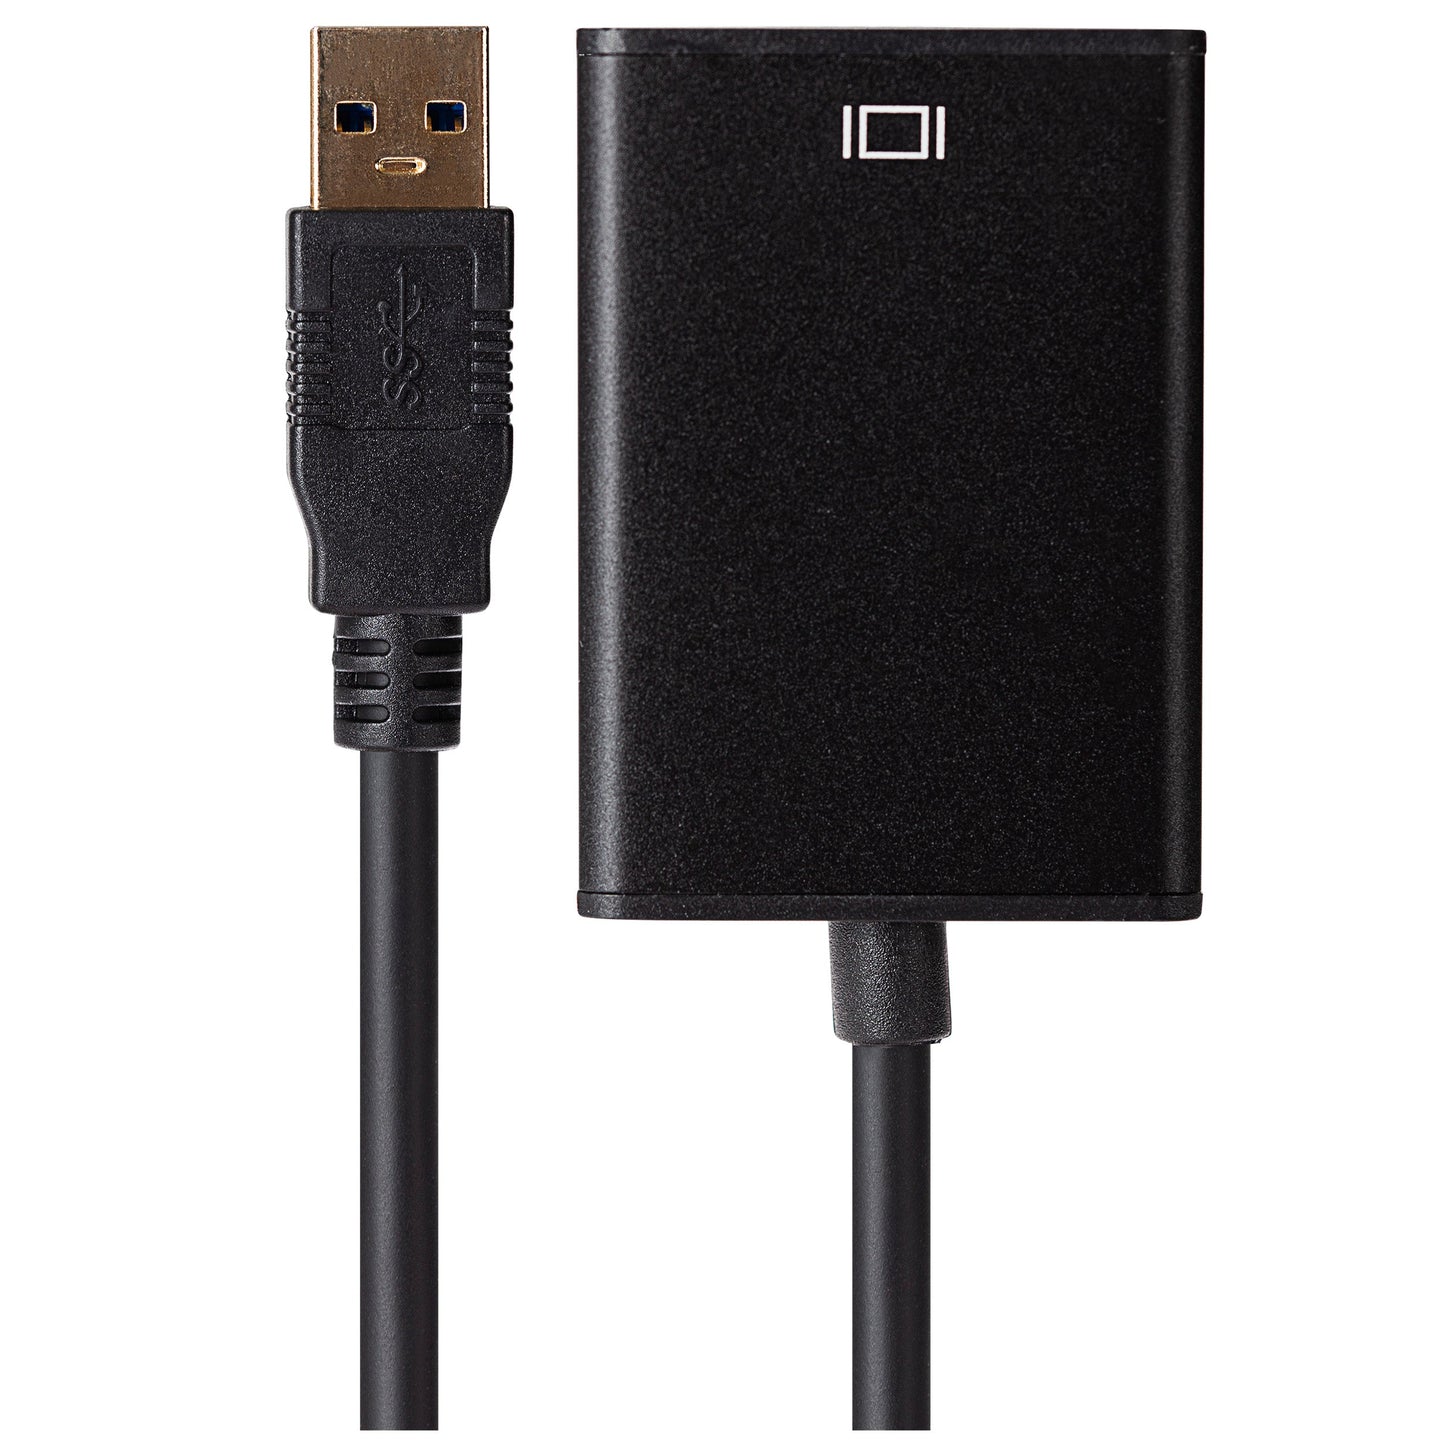 Maplin USB-A 3.0 to HDMI Adapter with 15cm Cable - maplin.co.uk